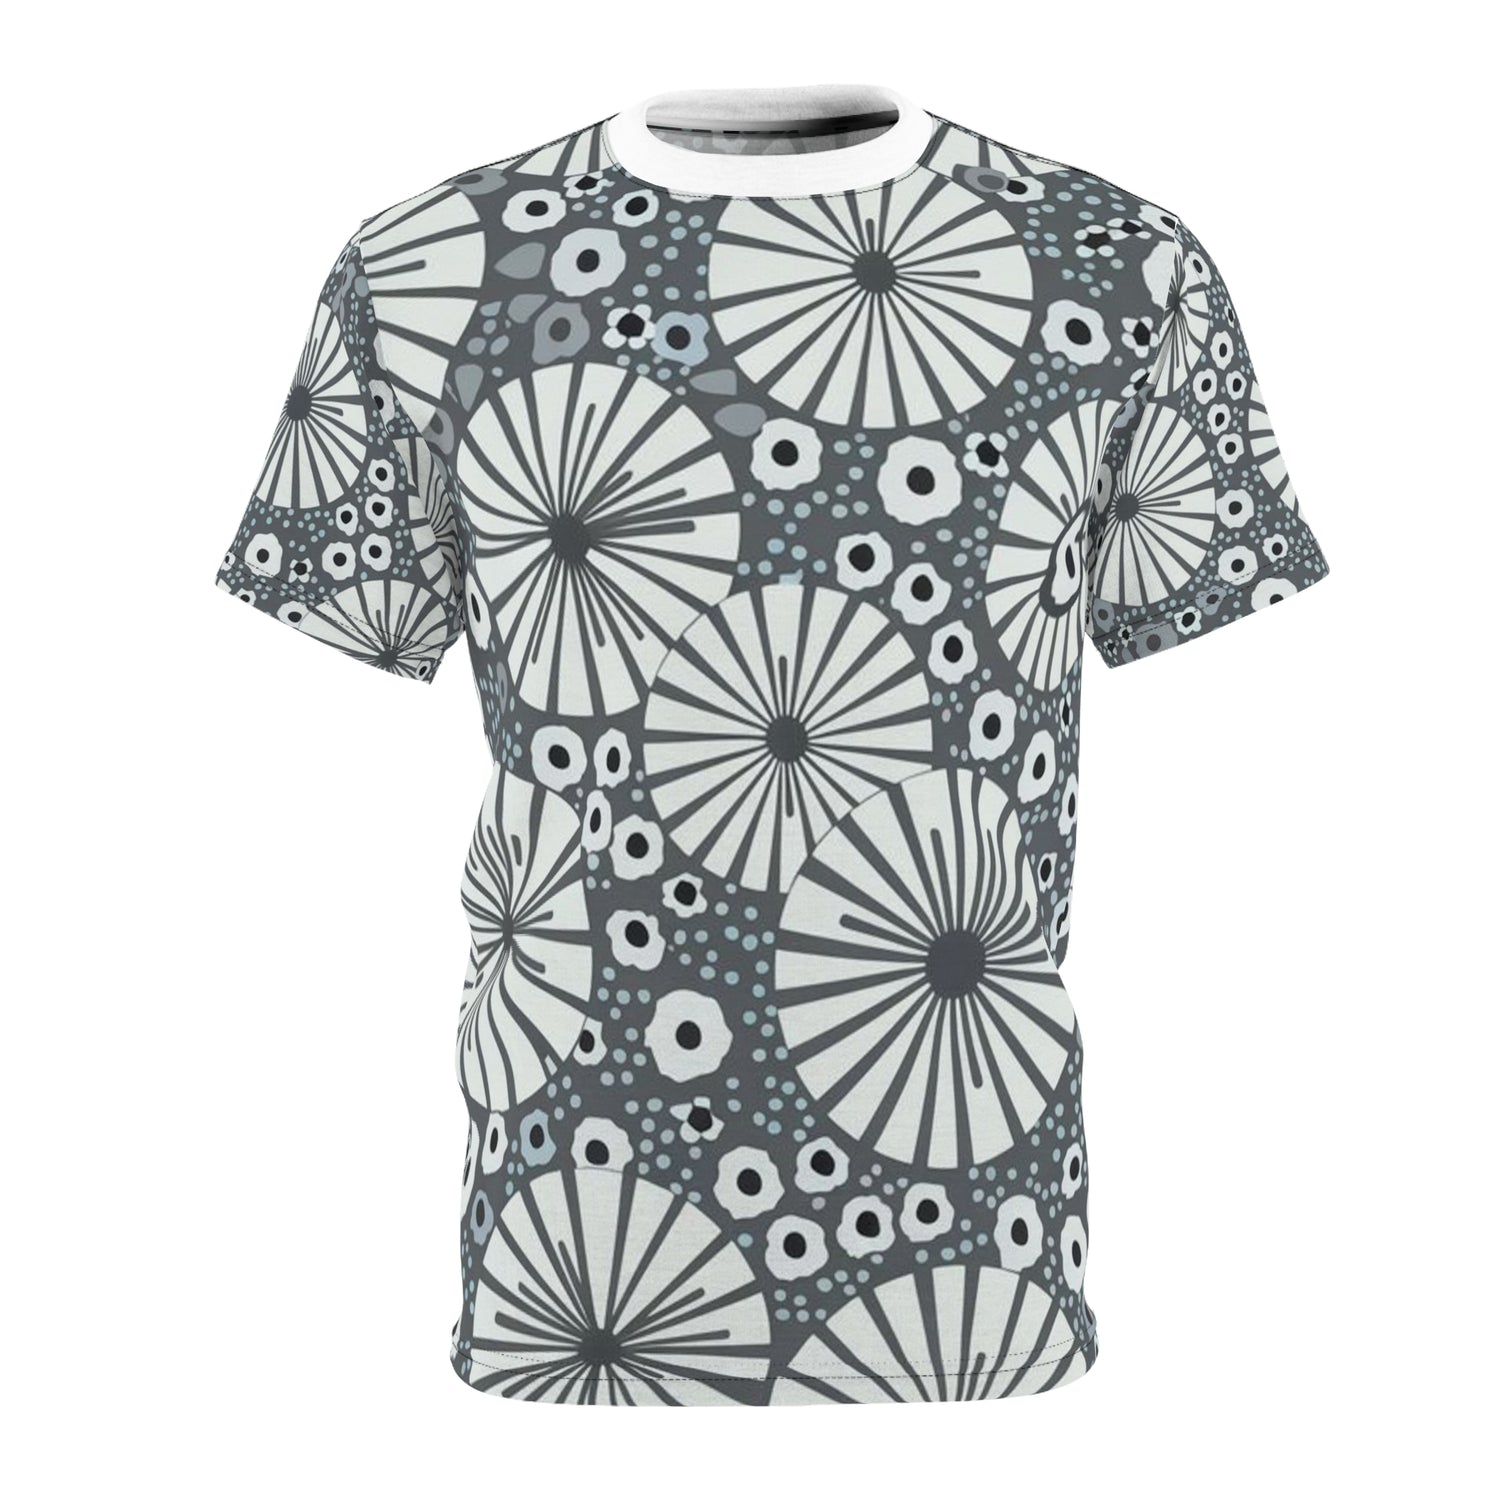 Unisex Cut & Sew Black and White All Over Print Floral T-Shirt Front Side